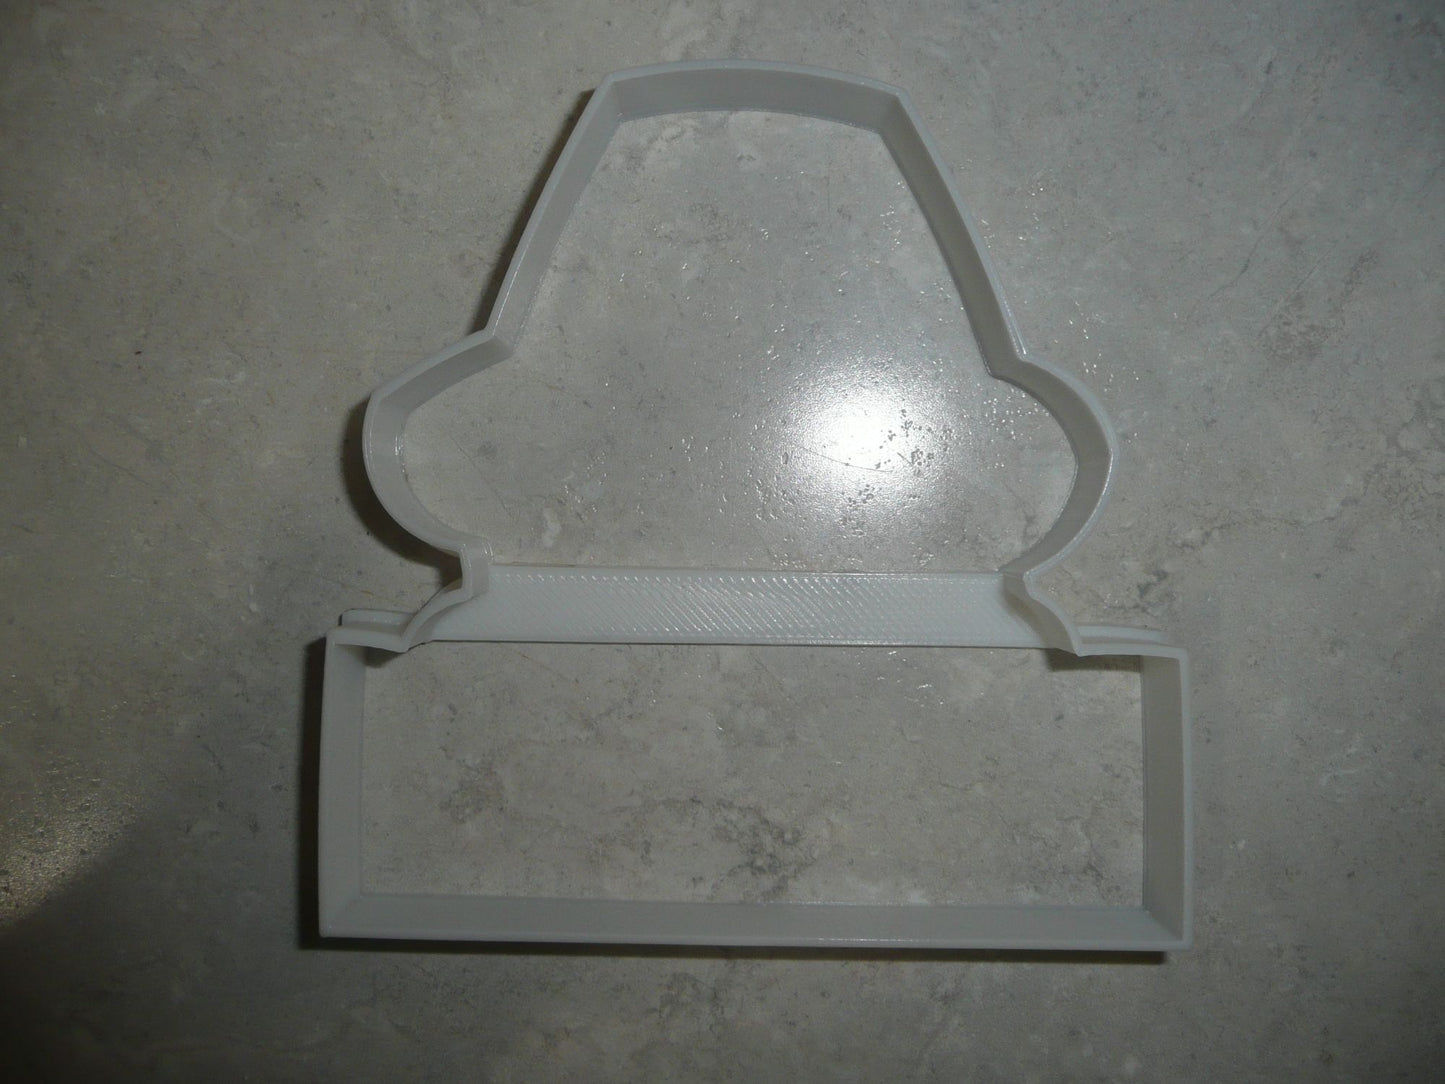 Pilgrim Boy Face Outline With Banner Plymouth Colony Cookie Cutter USA PR3108